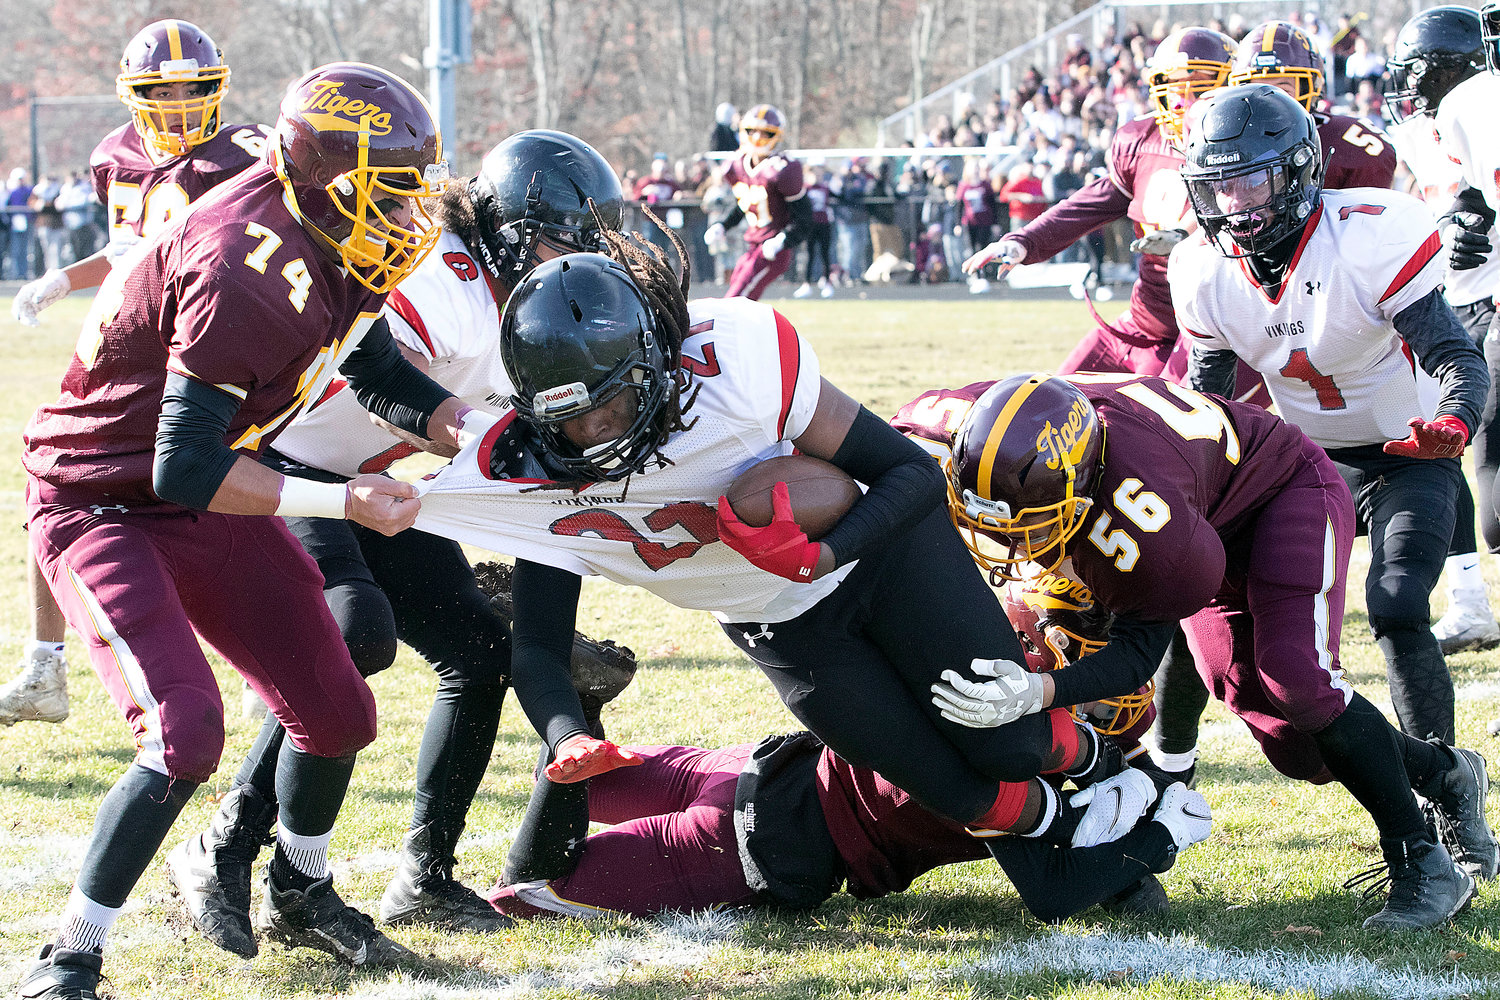 Tigers linebackers Ali Chamseddine (left) and Colby Brown take down a Rogers runningback.